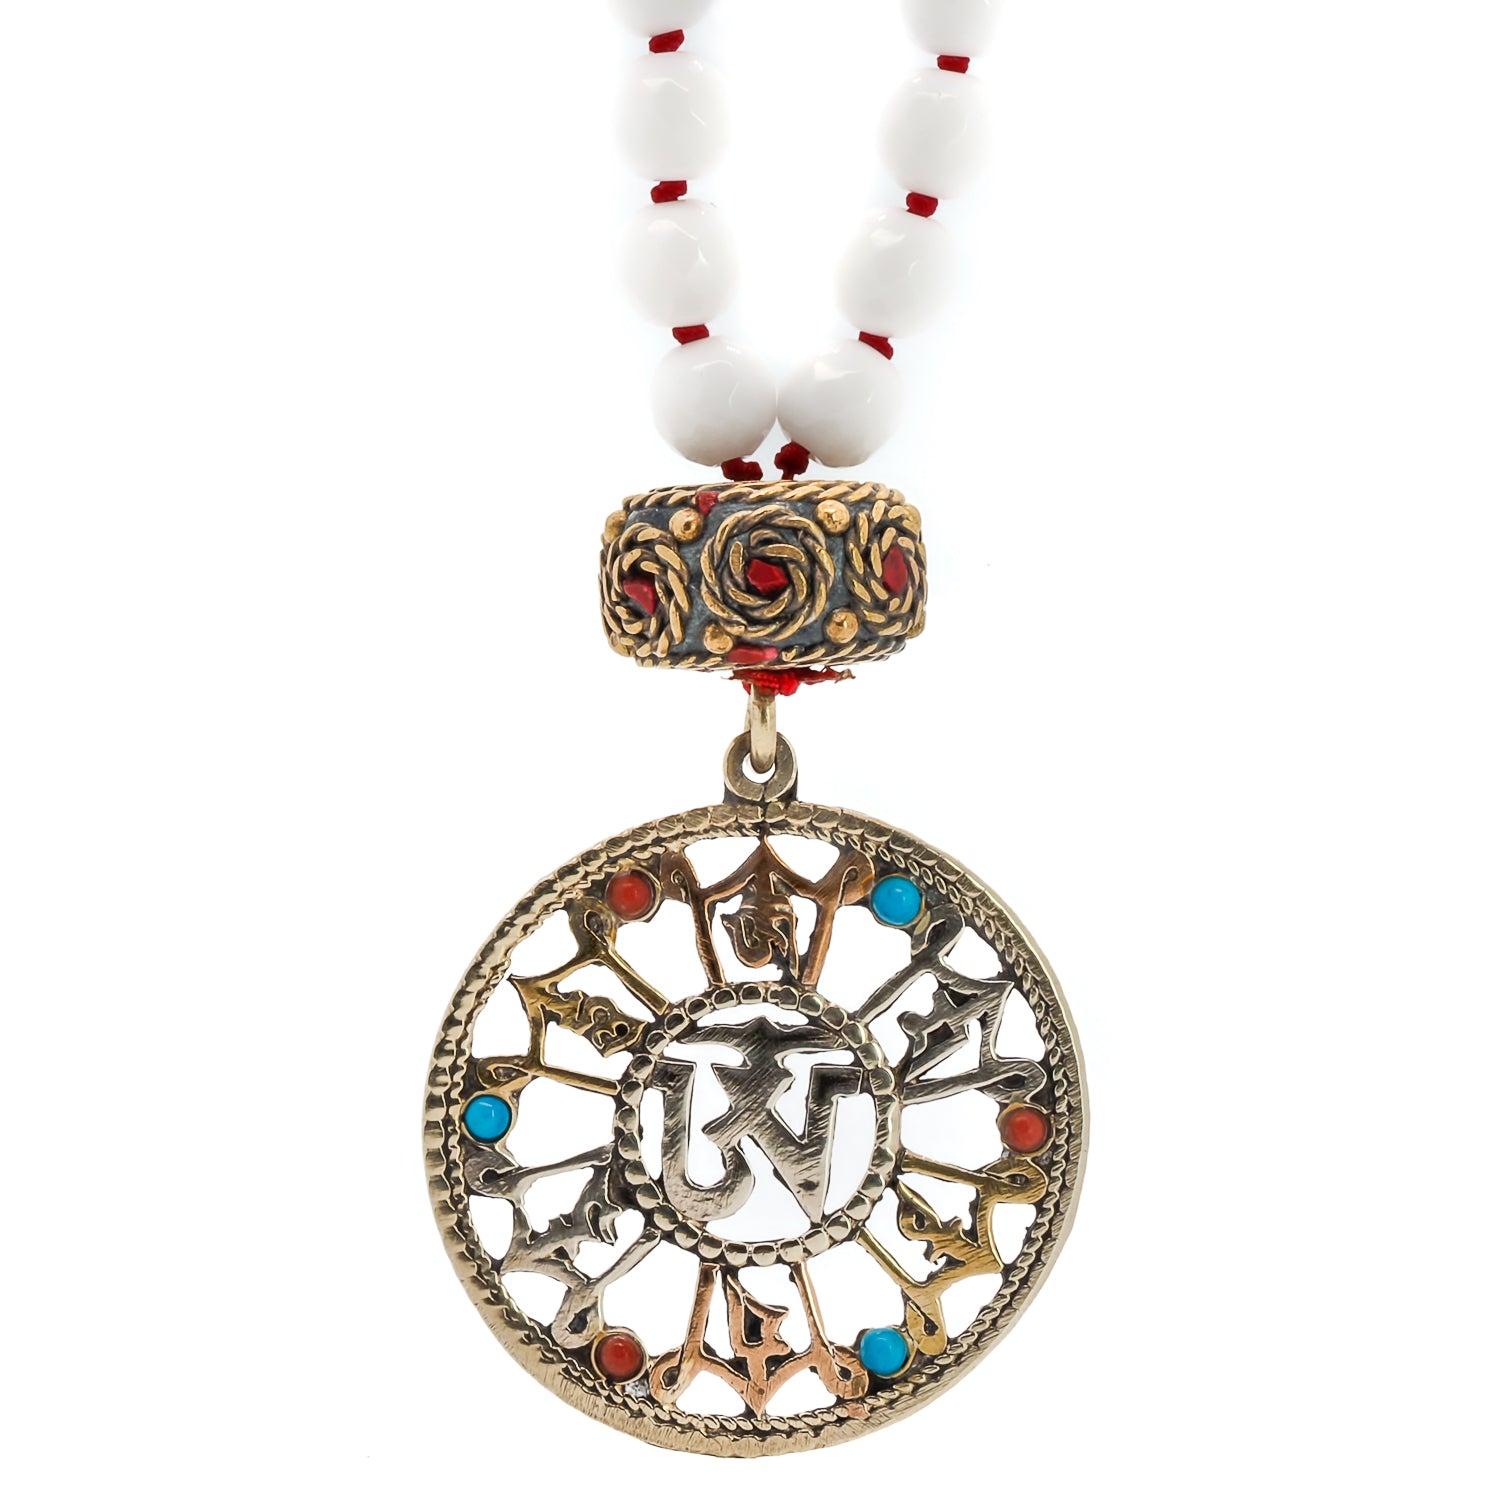 Eye Of The Buddha Necklace - Unique design with white Jade stones, Nepal mantra beads, and a bronze Om charm, symbolizing wisdom and compassion.